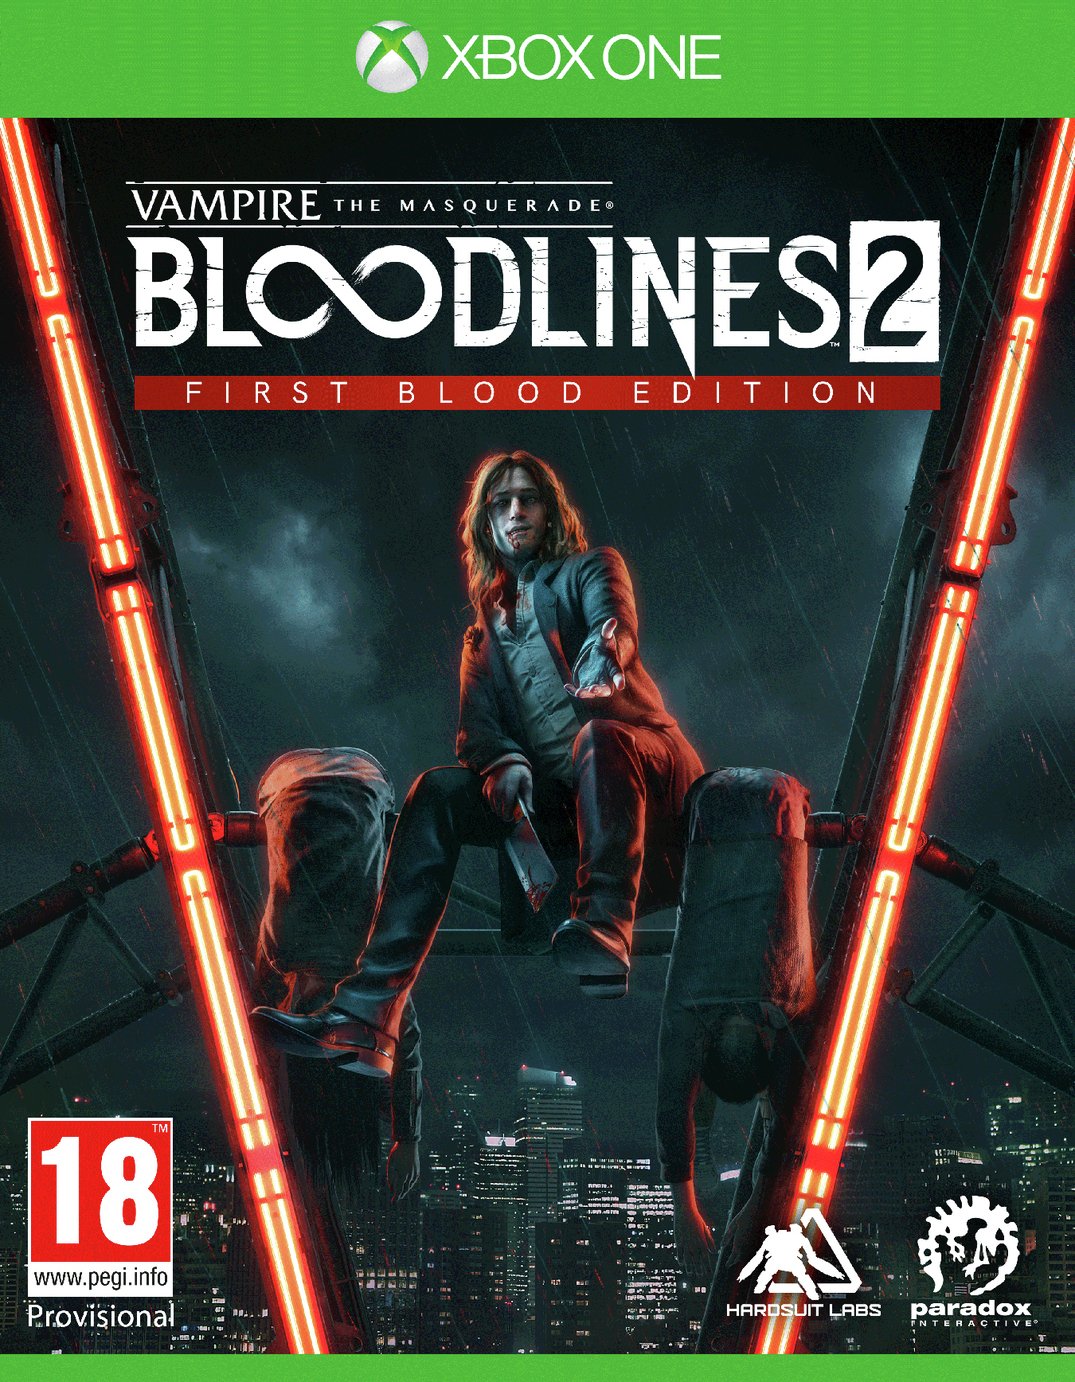 Vampire: The Masquerade Bloodlines 2 Xbox One Game Pre-Order